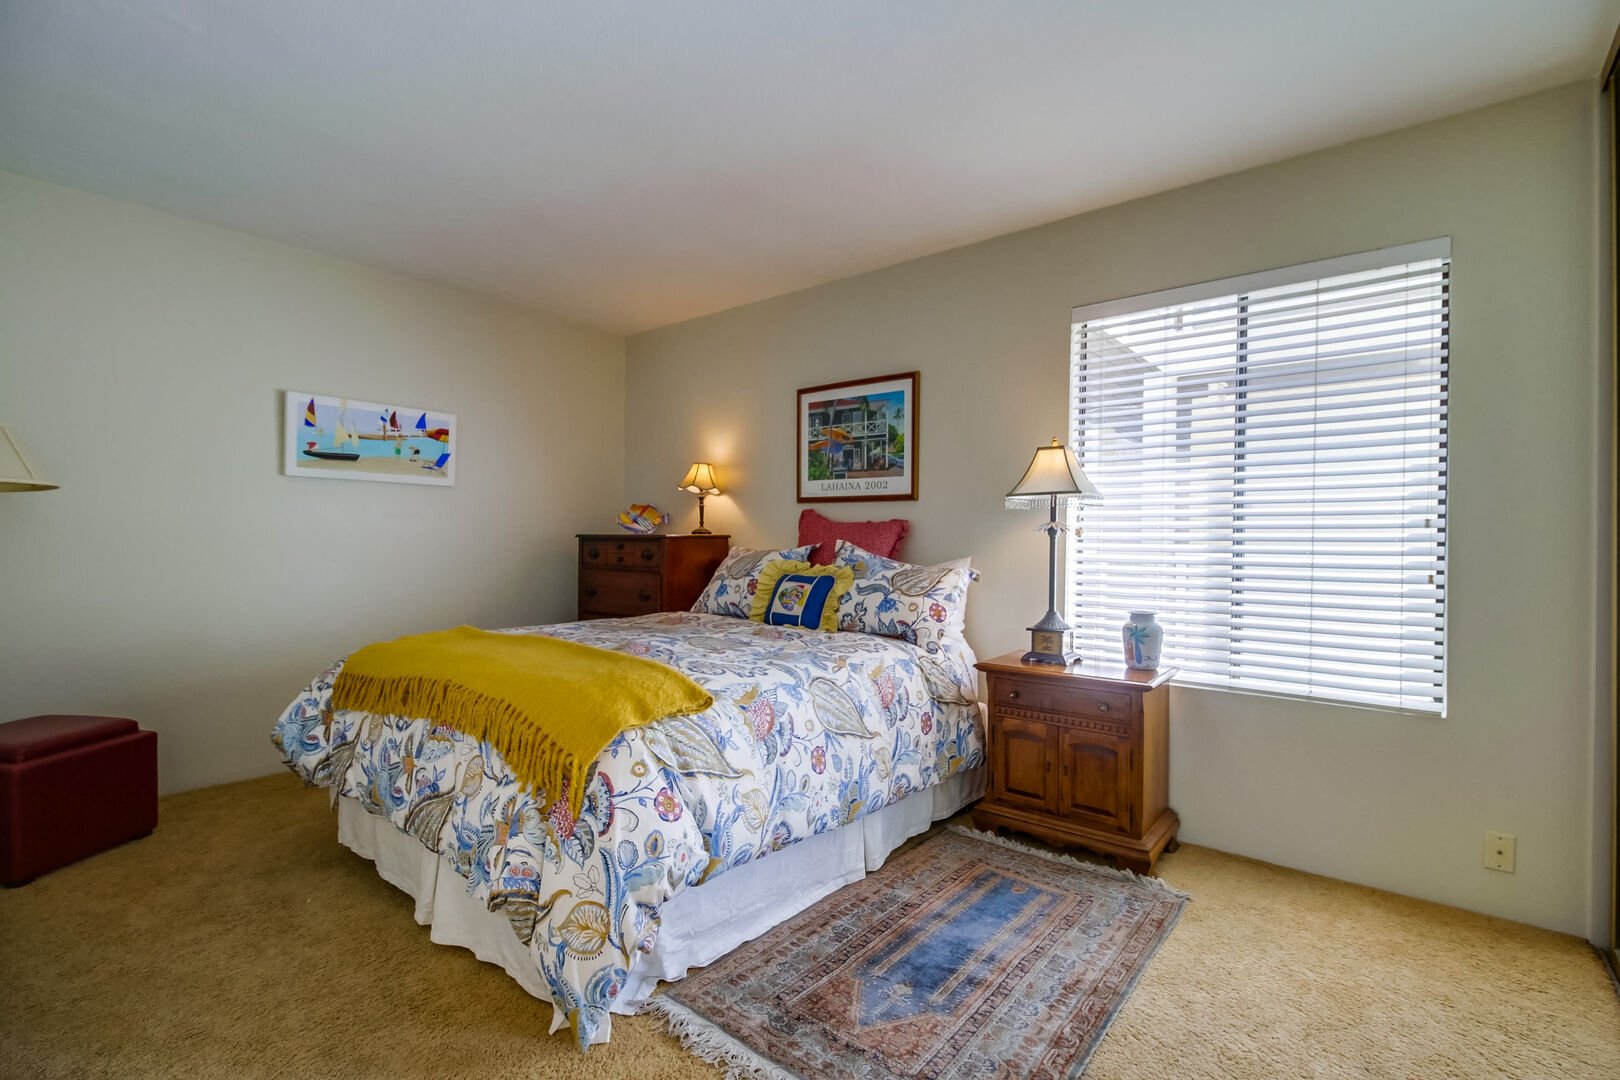 Guest bedroom with adjustable blinds on the windows and closet space